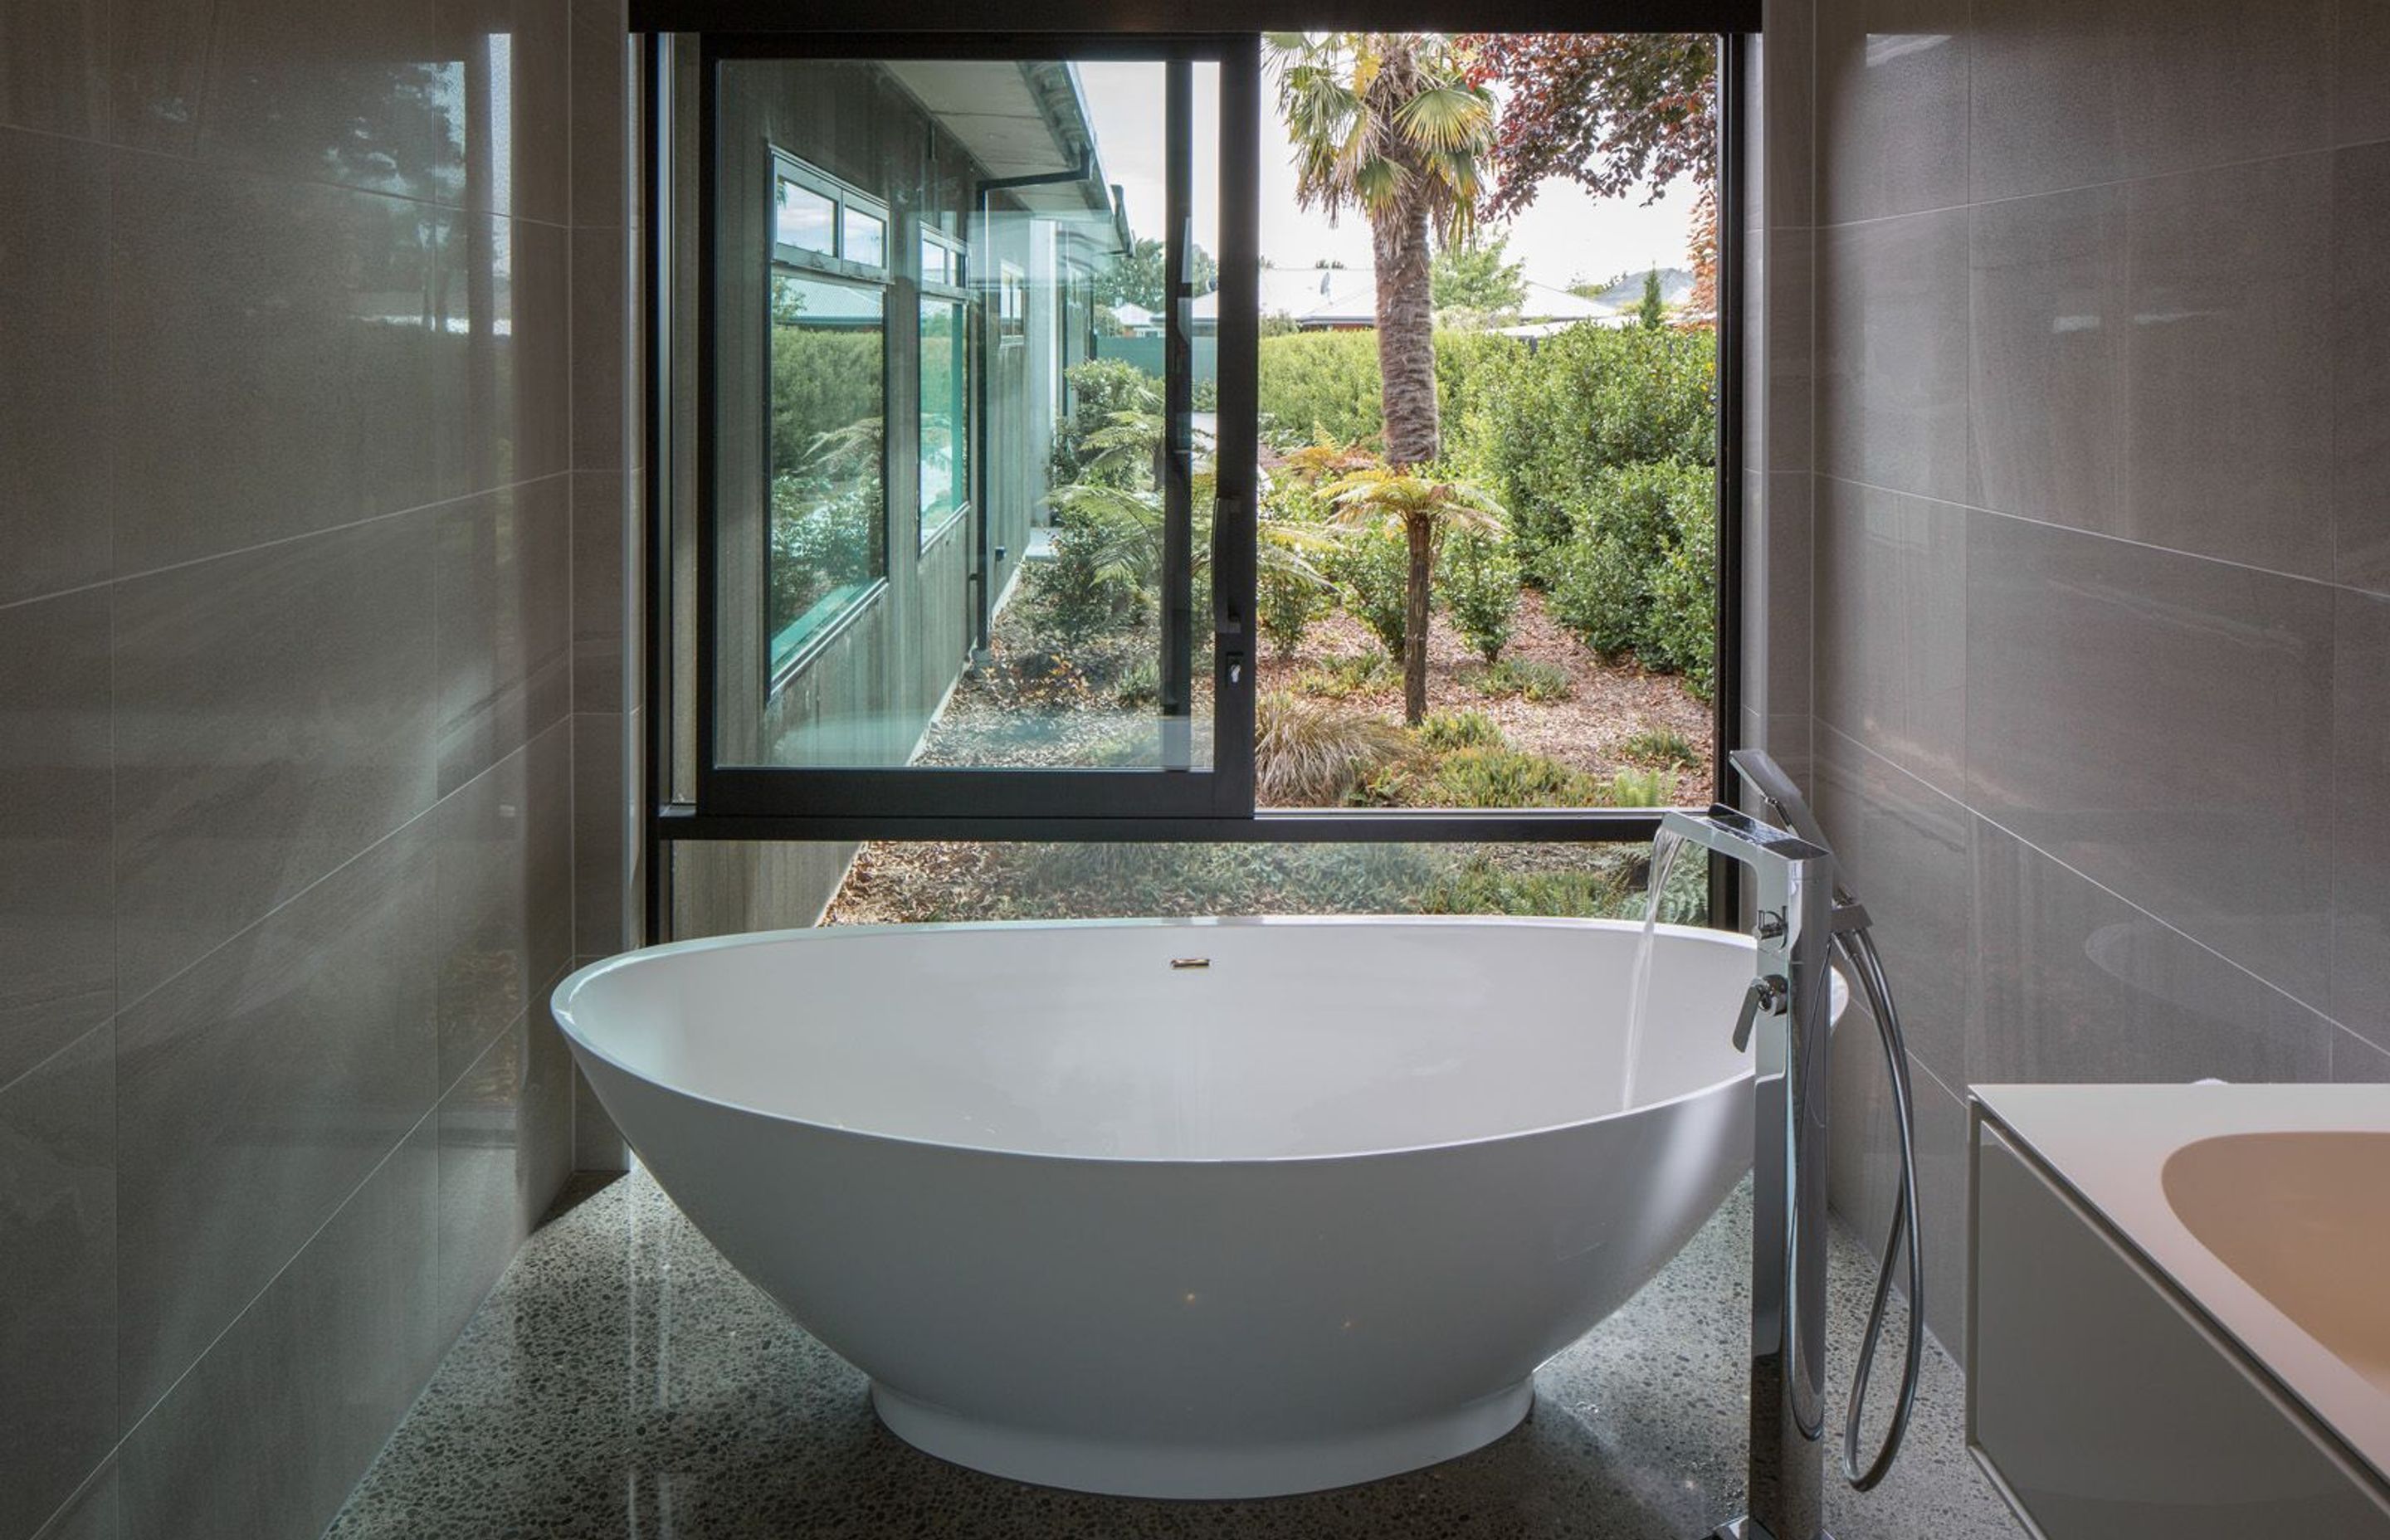 The master ensuite features floor-to-ceiling glazing, further enhancing the sense of connection to the garden.